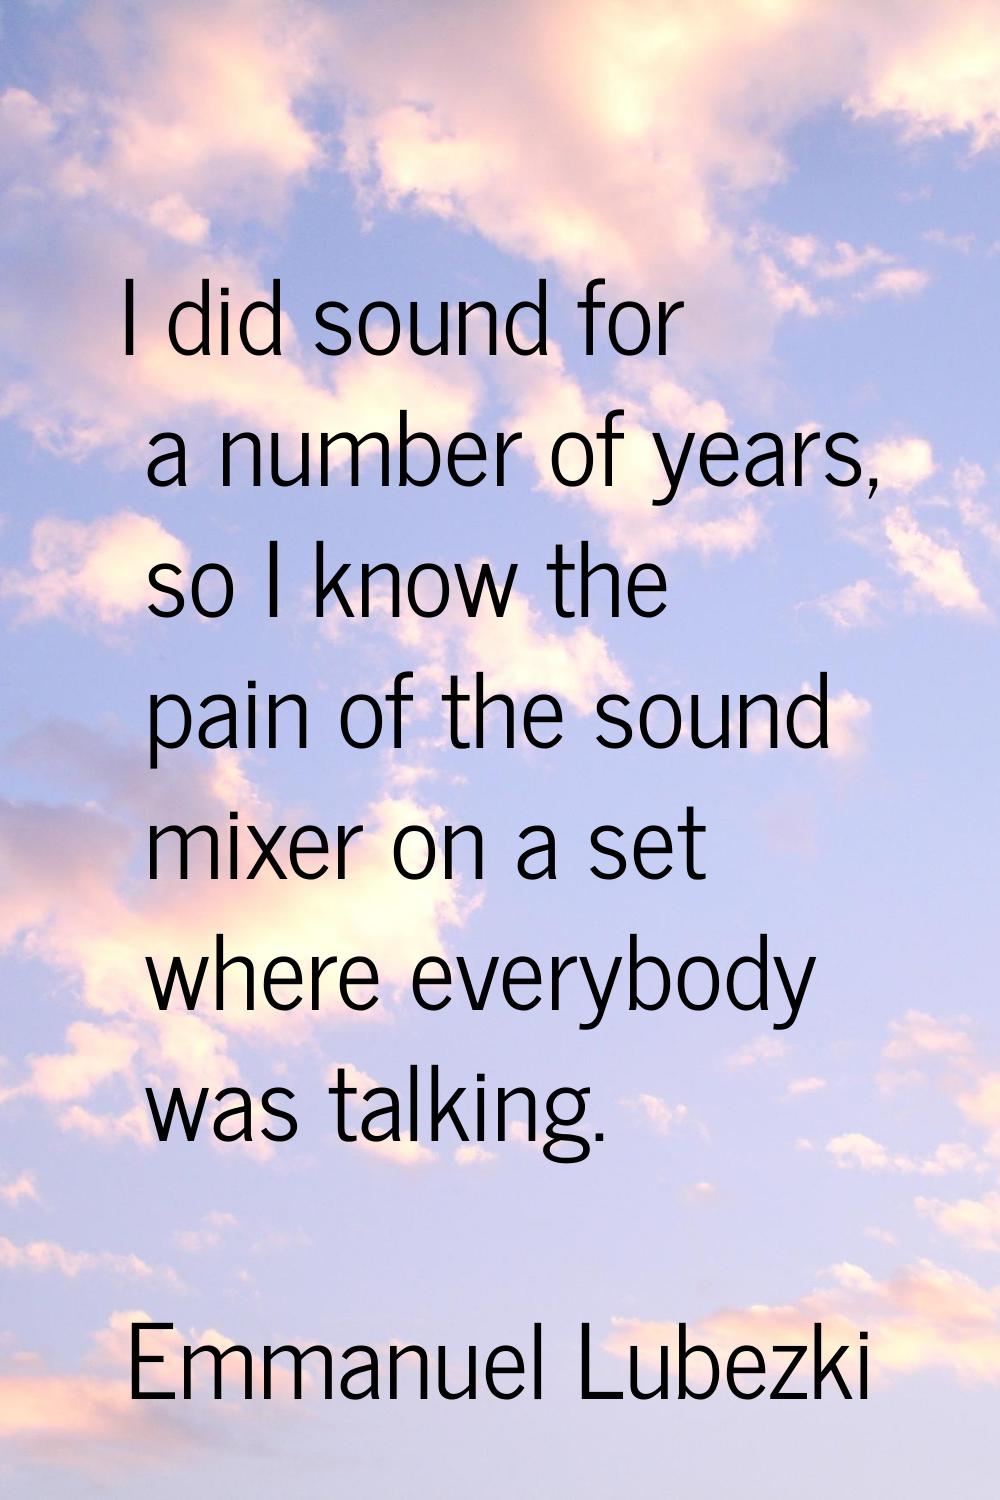 I did sound for a number of years, so I know the pain of the sound mixer on a set where everybody w